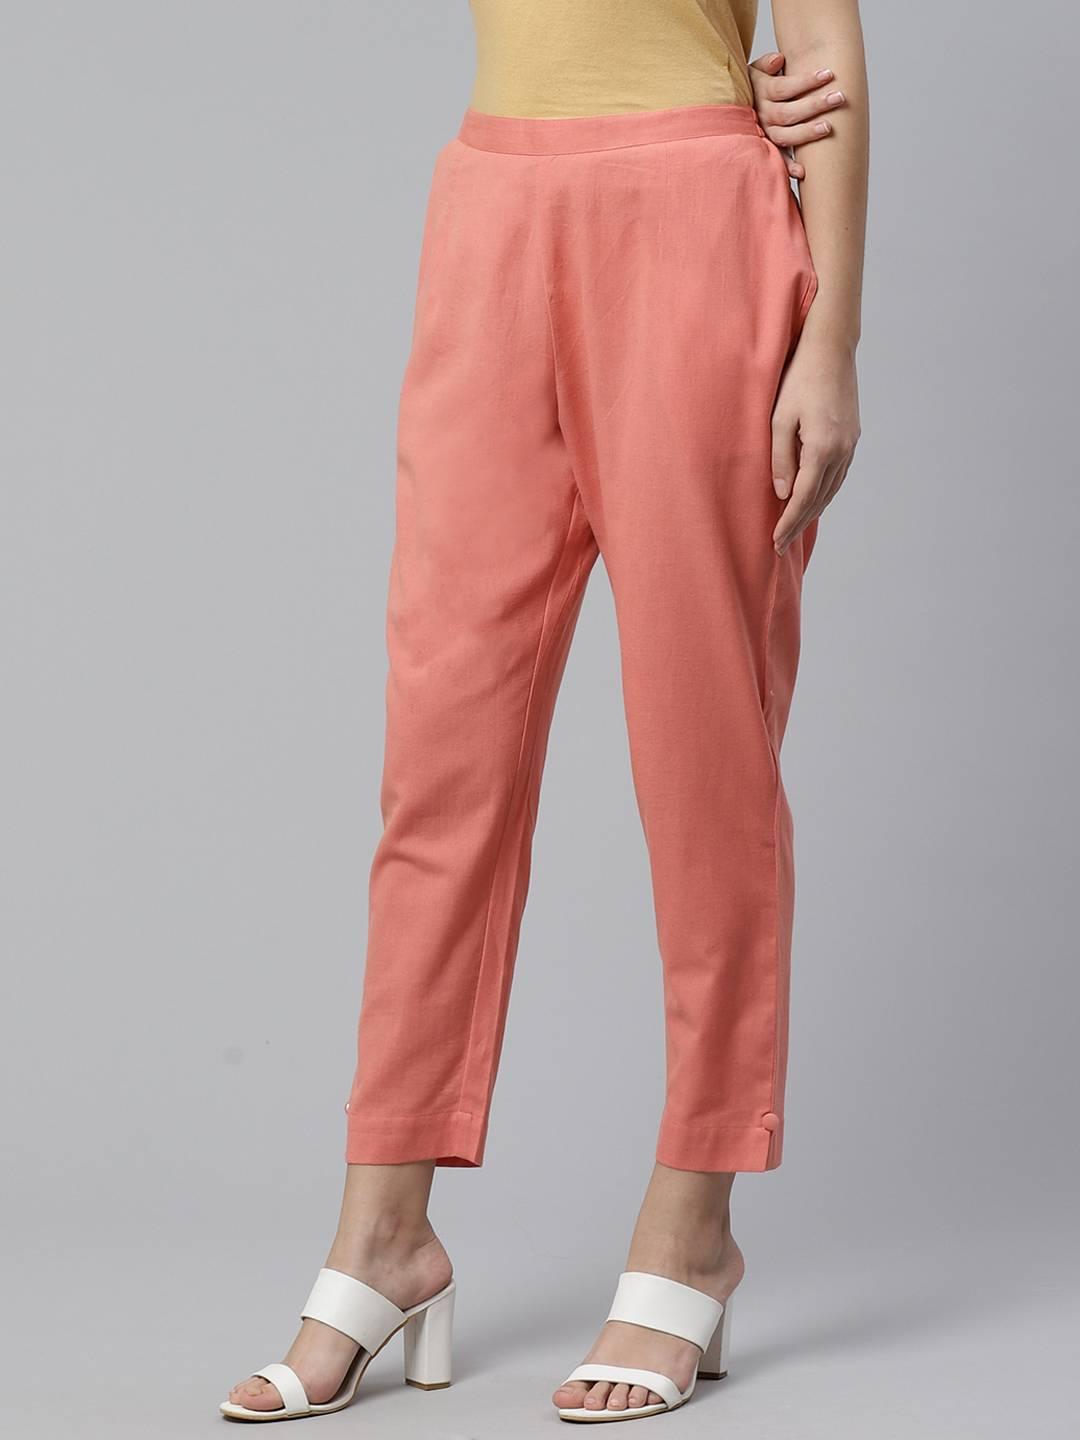 Peach Solid Cotton Trousers